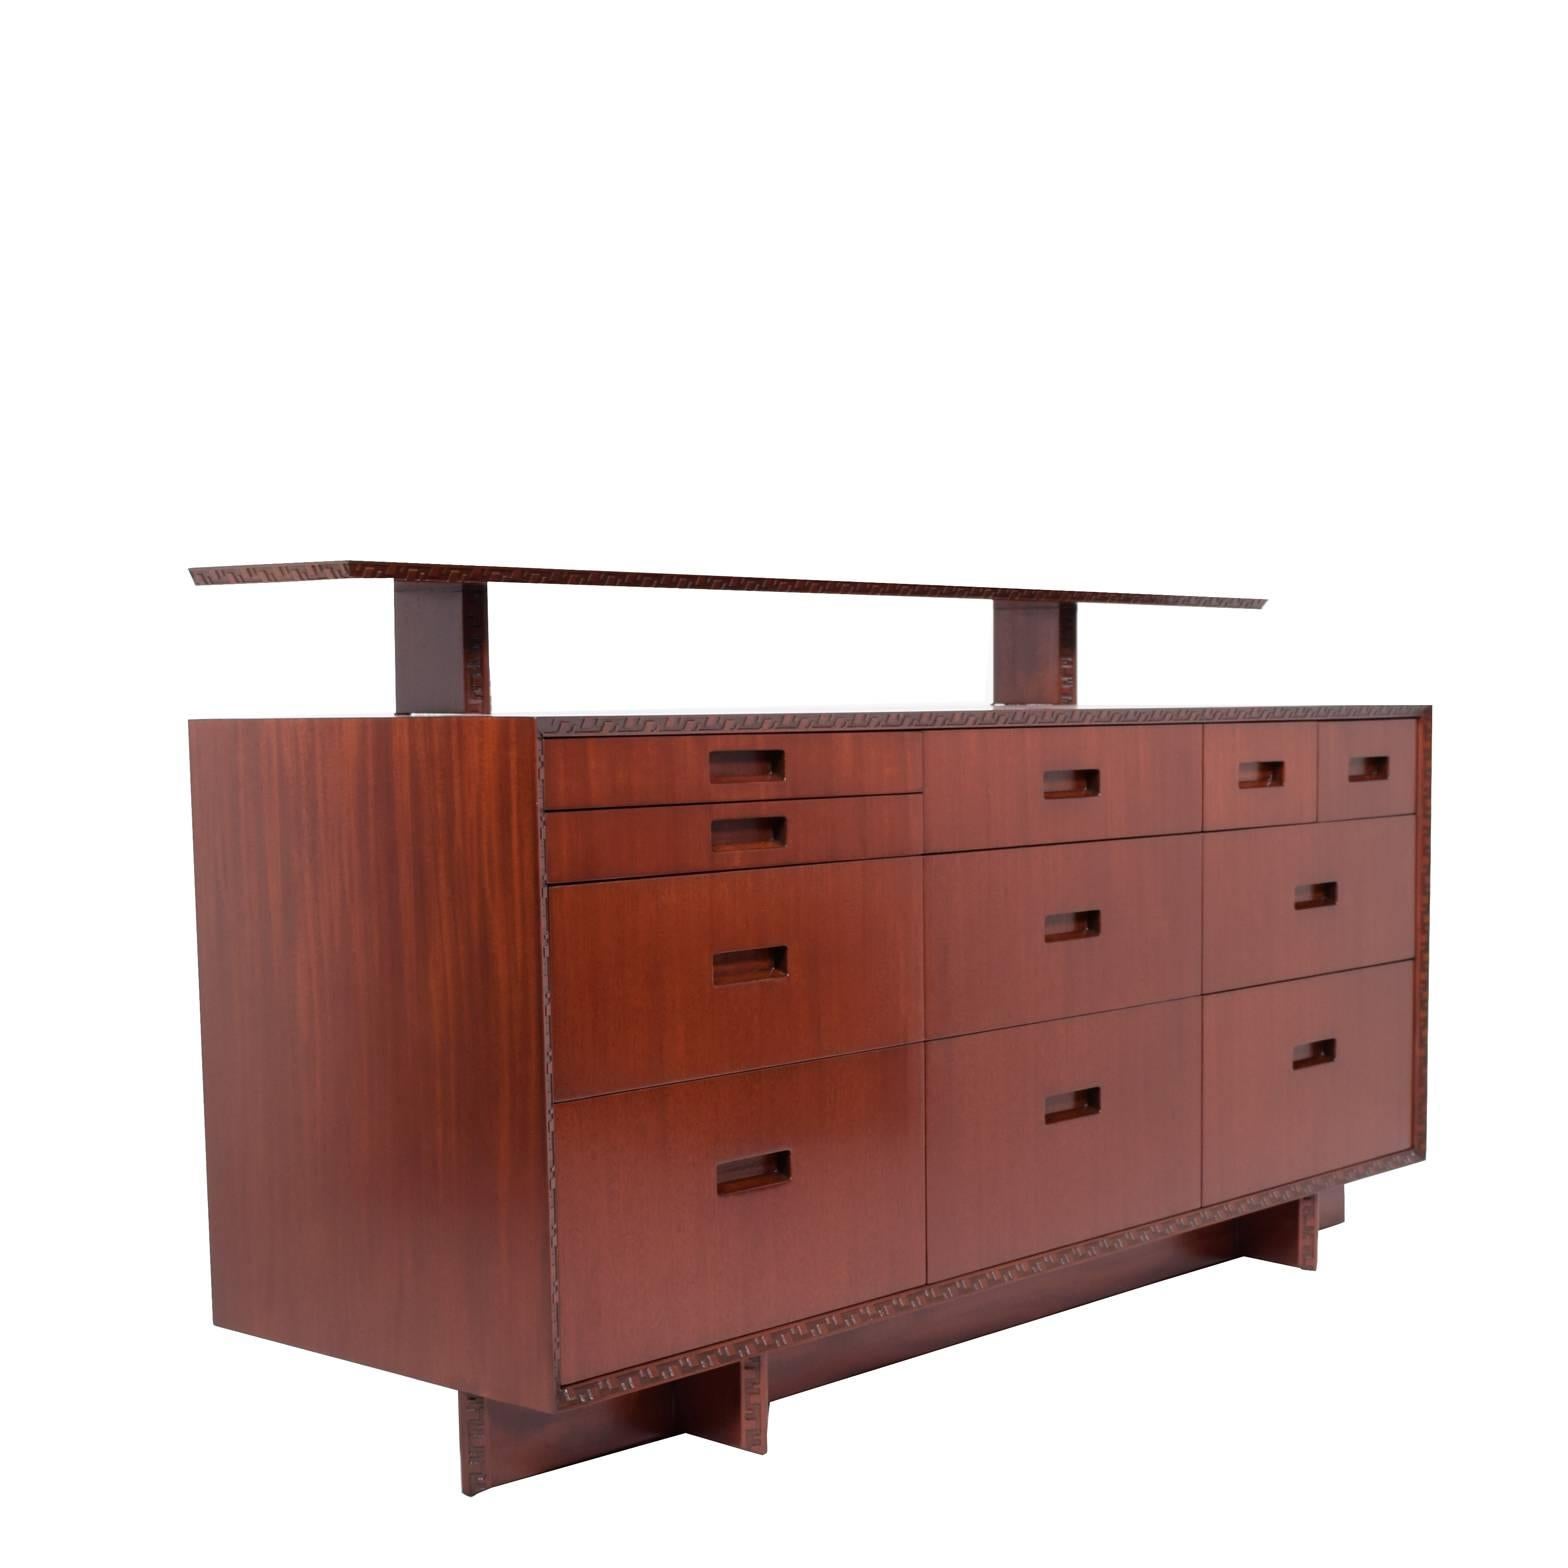 American Craftsman Chest of Drawers with Shelf by Frank Lloyd Wright